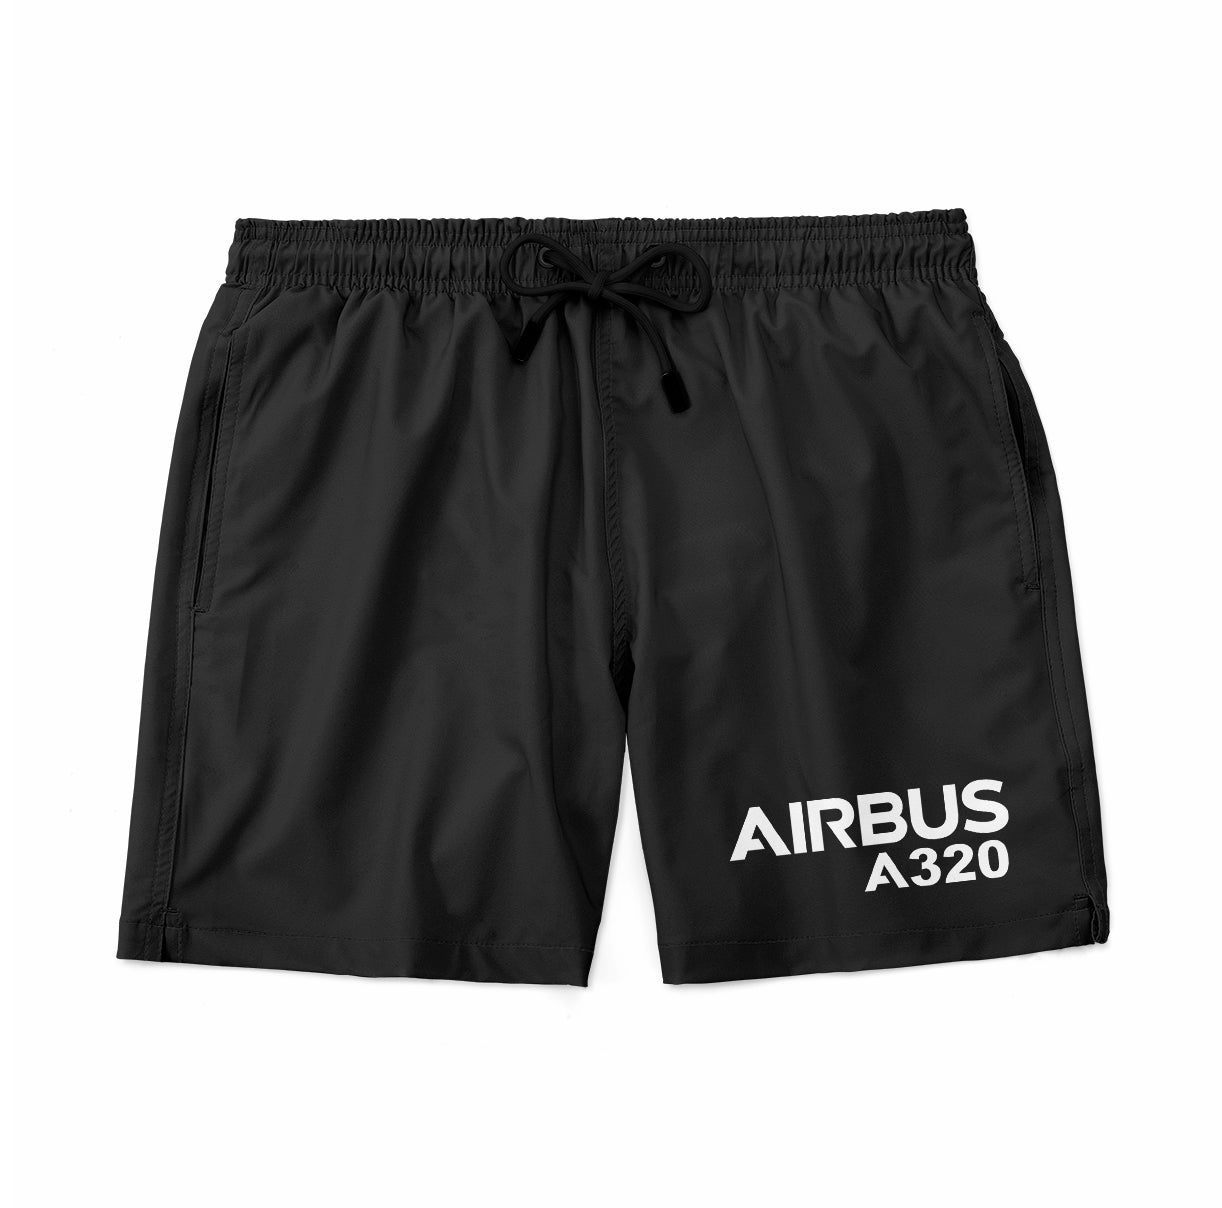 Airbus A320 & Text Designed Swim Trunks & Shorts